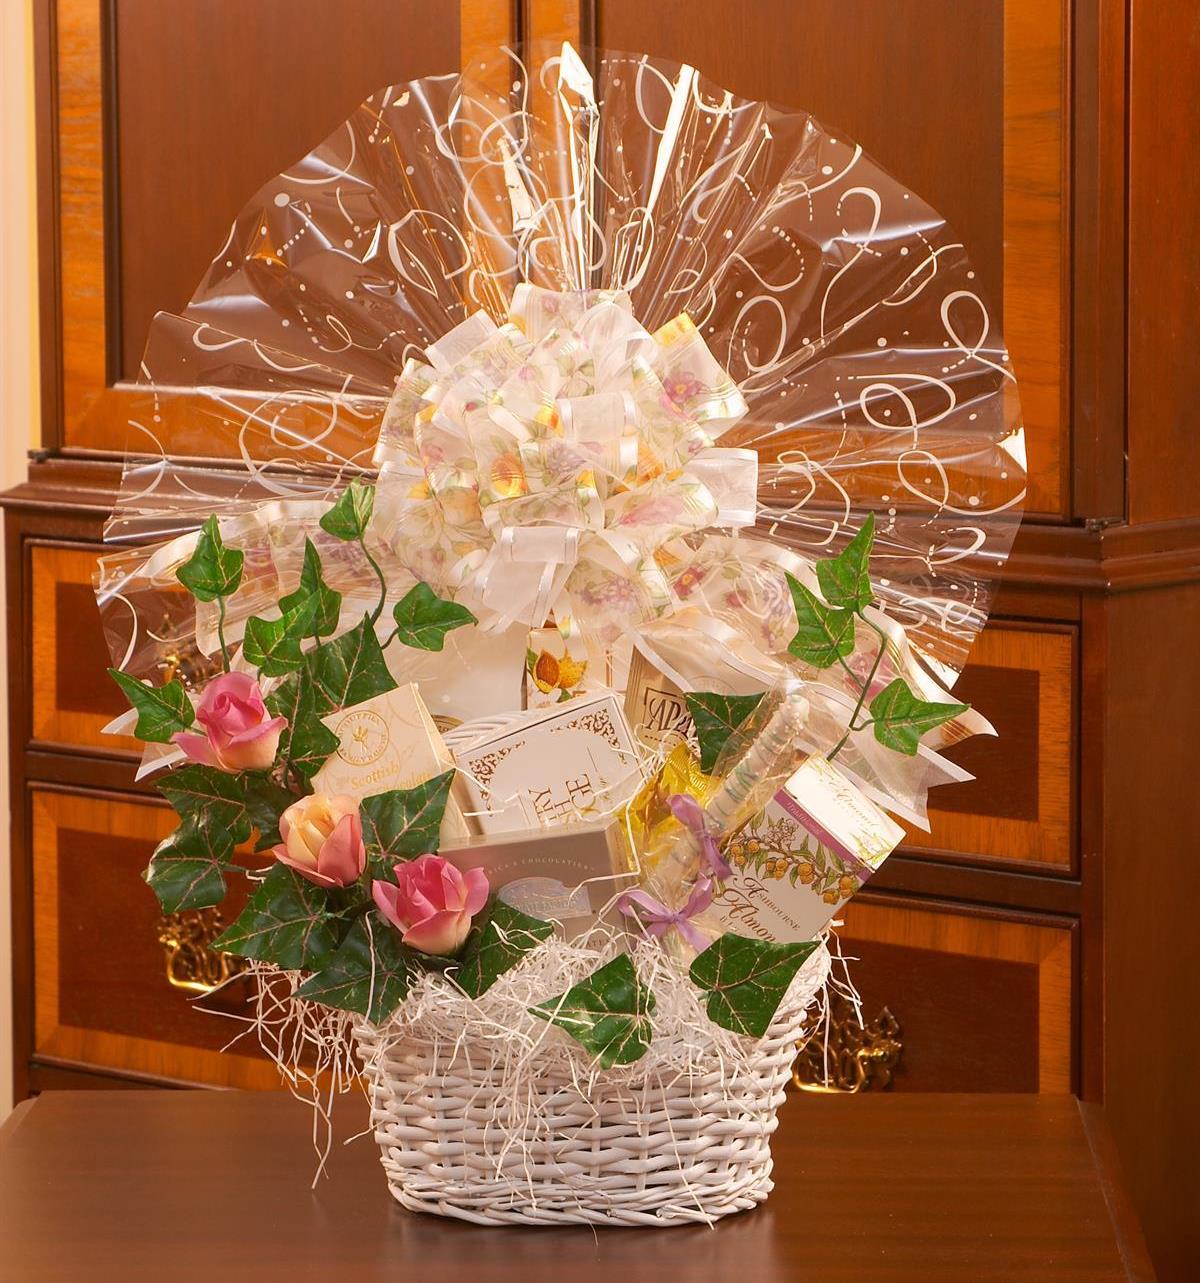 Wedding gift basket featuring delicious sweets and treats.